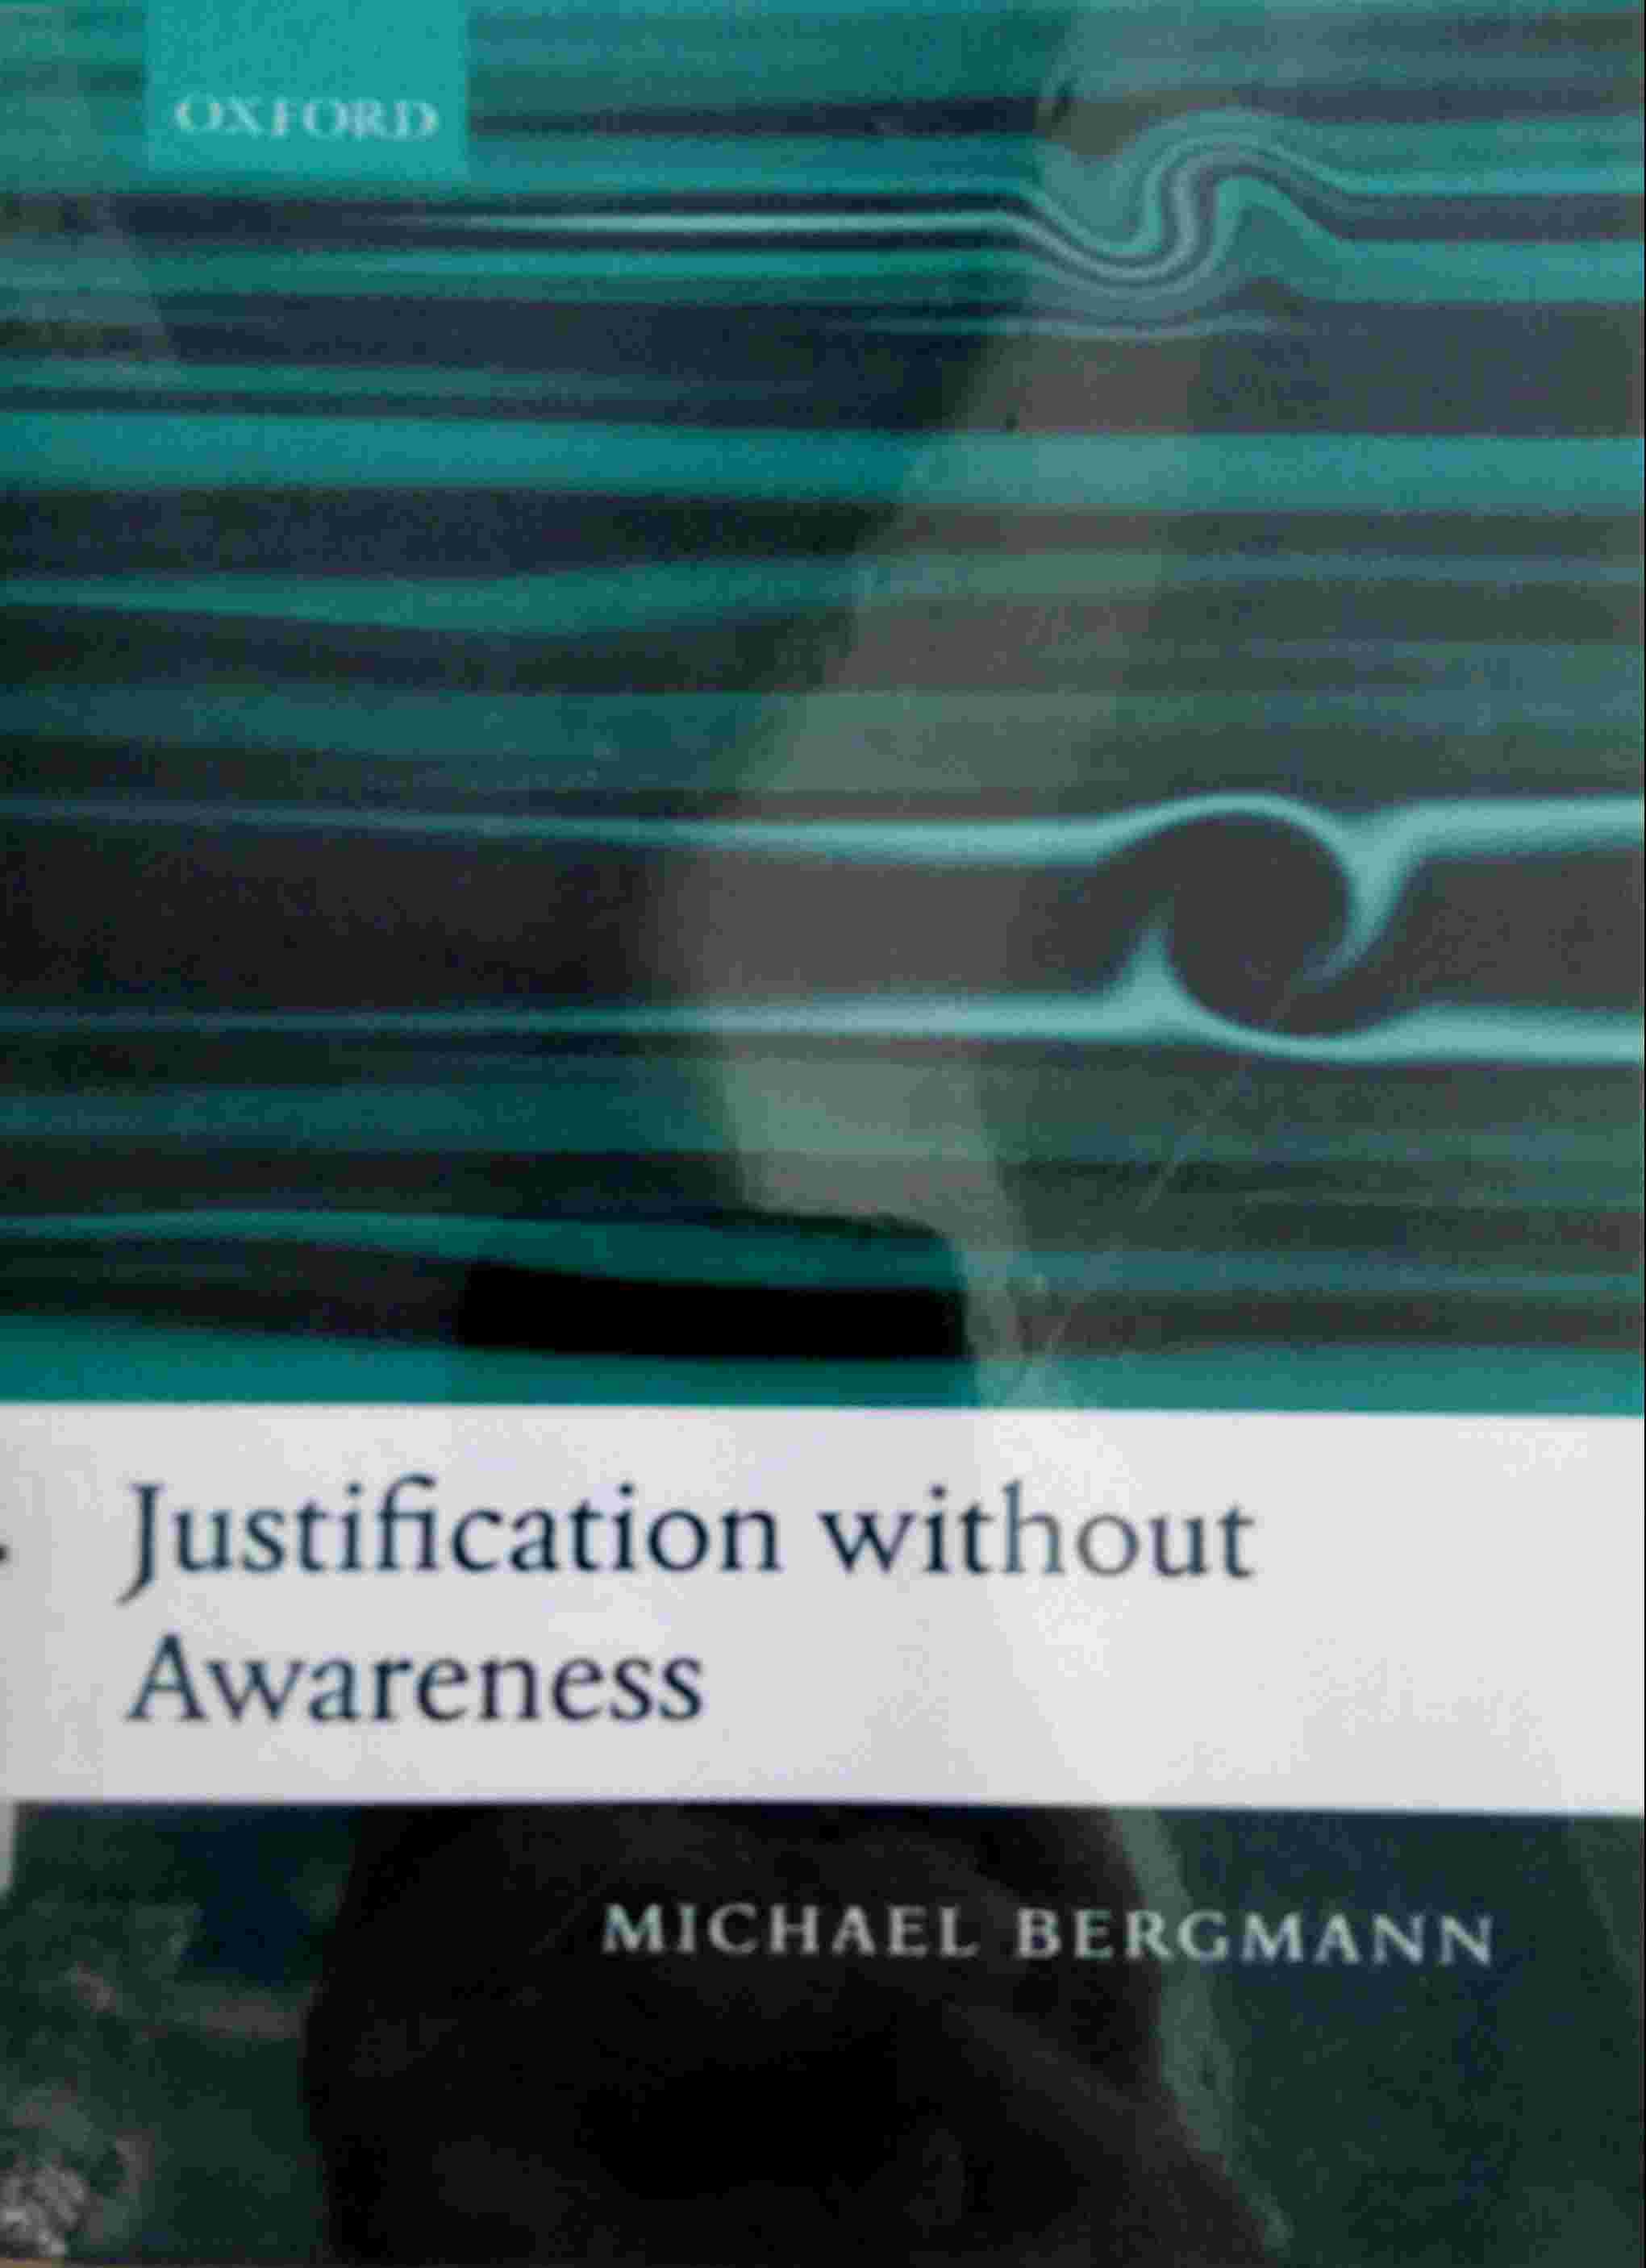 JUSTIFICATION WITHOUT AWARENESS